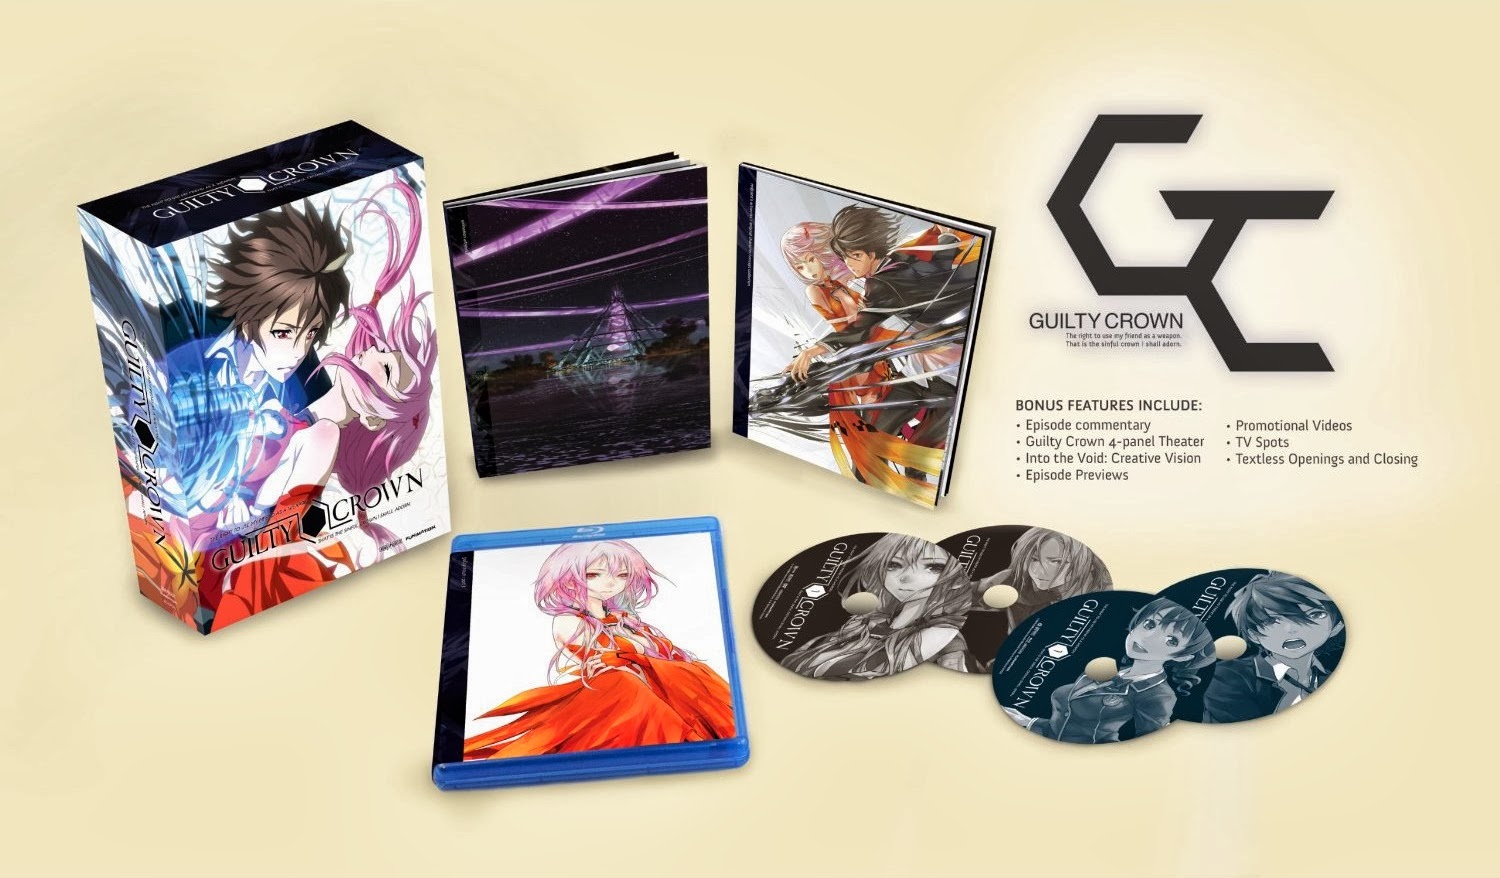 Amazoncom: Guilty Crown: Complete Series, Part 1 Blu-ray